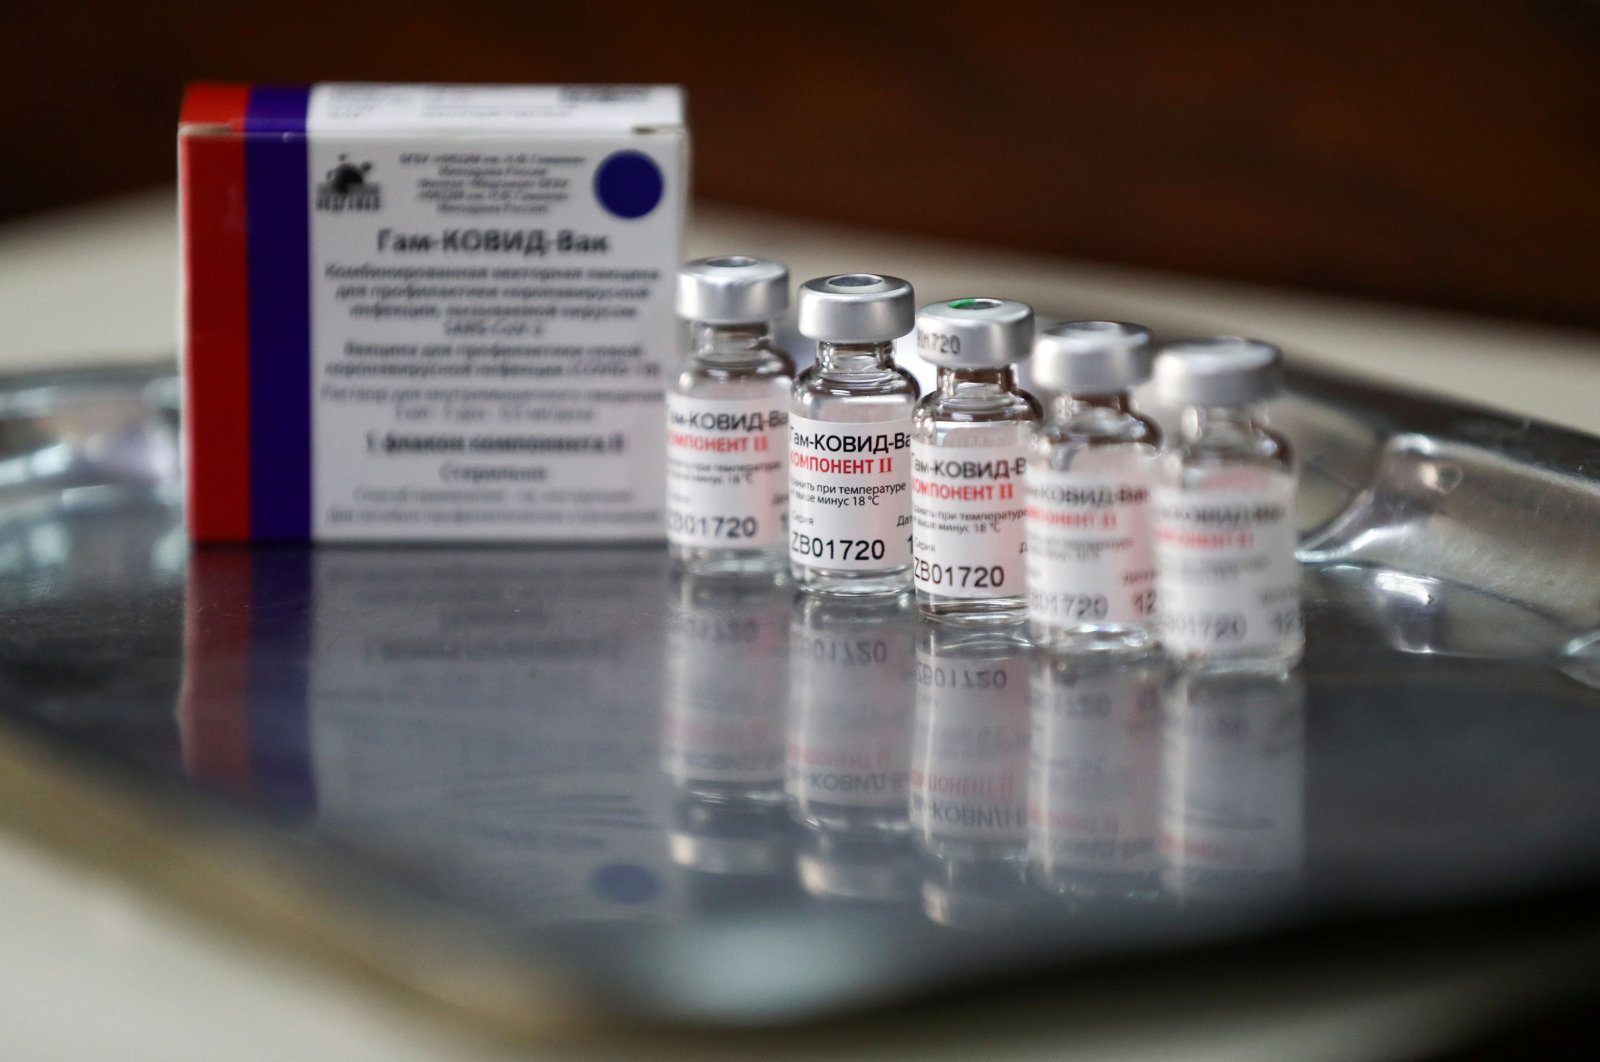 Empty vials of the second dose of the Sputnik V (Gam-COVID-Vac) vaccine are pictured at the San Martin hospital, in La Plata, on the outskirts of Buenos Aires, Argentina on Jan. 21, 2021. (Reuters Photo)